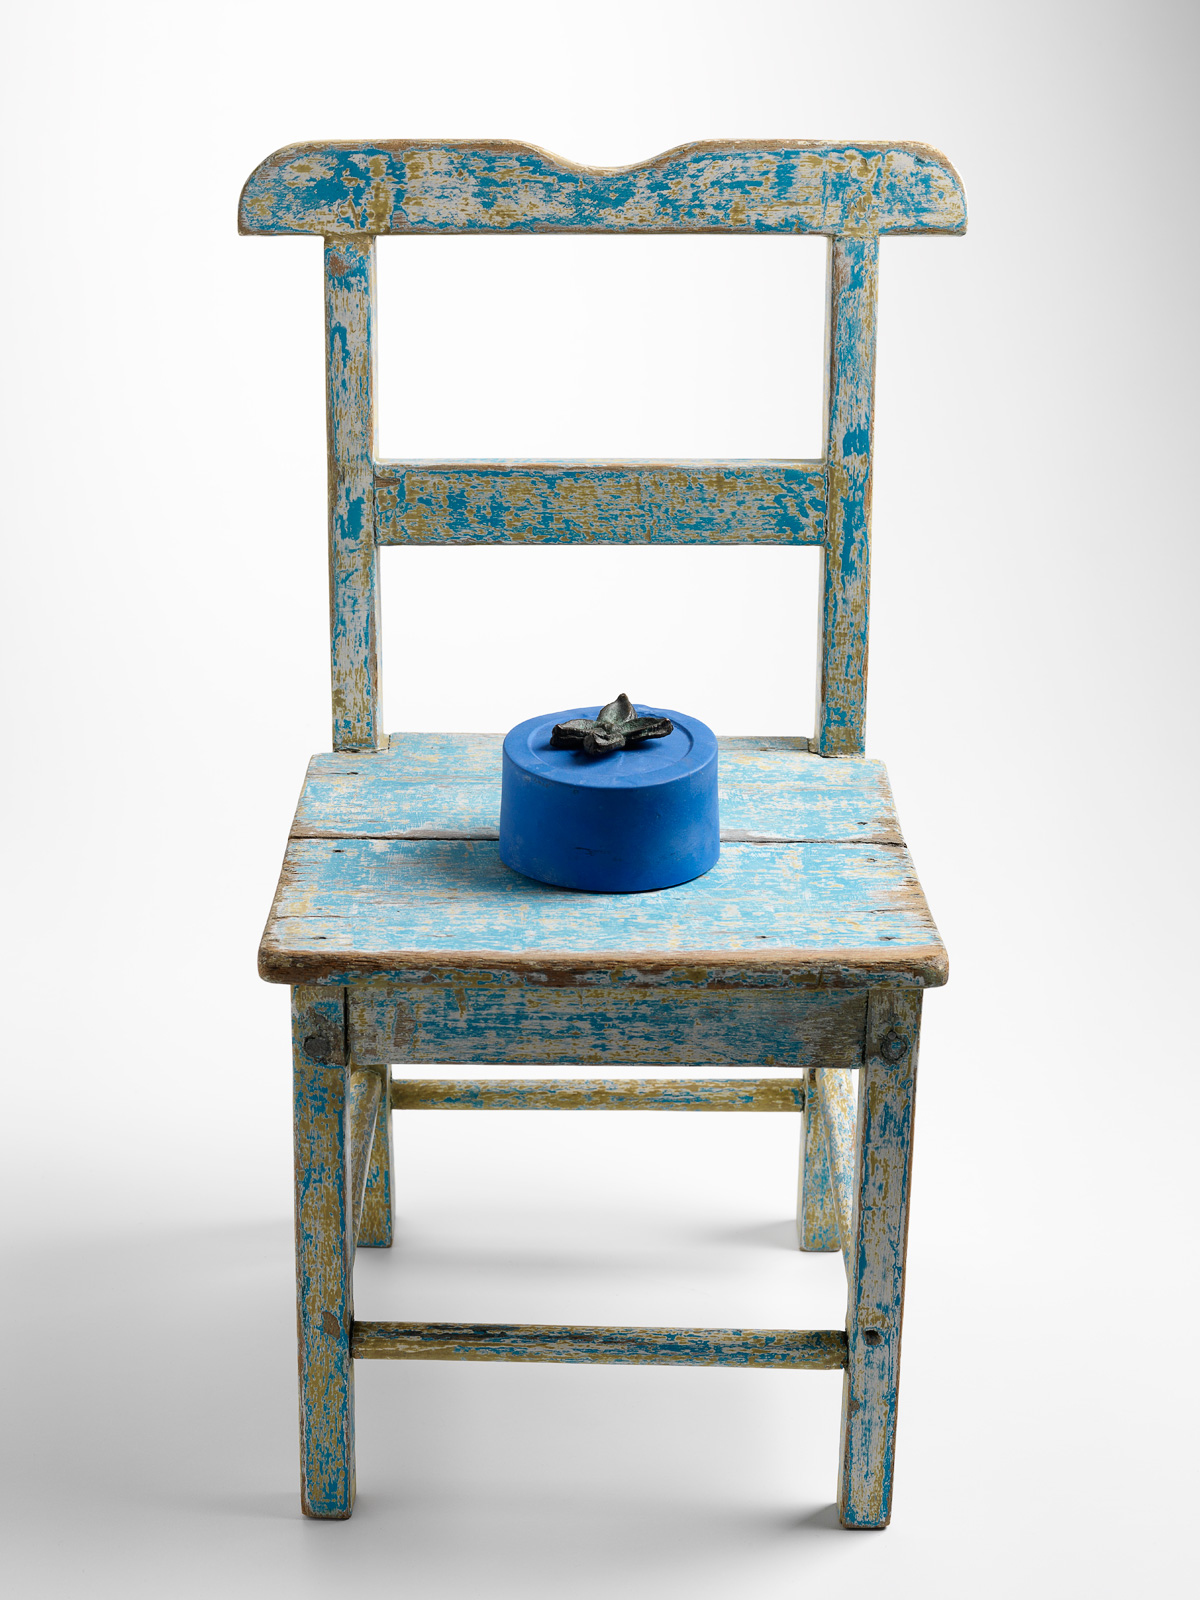  Lee Salomone,&nbsp; For Yves Klein,  from the series , Works from the (found)ry, 2013-2016,&nbsp; bronze, patina, chroma key blue acrylic paint, wooden chair, various paints, 55 x 27 x 28cm. Photograph by Grant Hancock. 